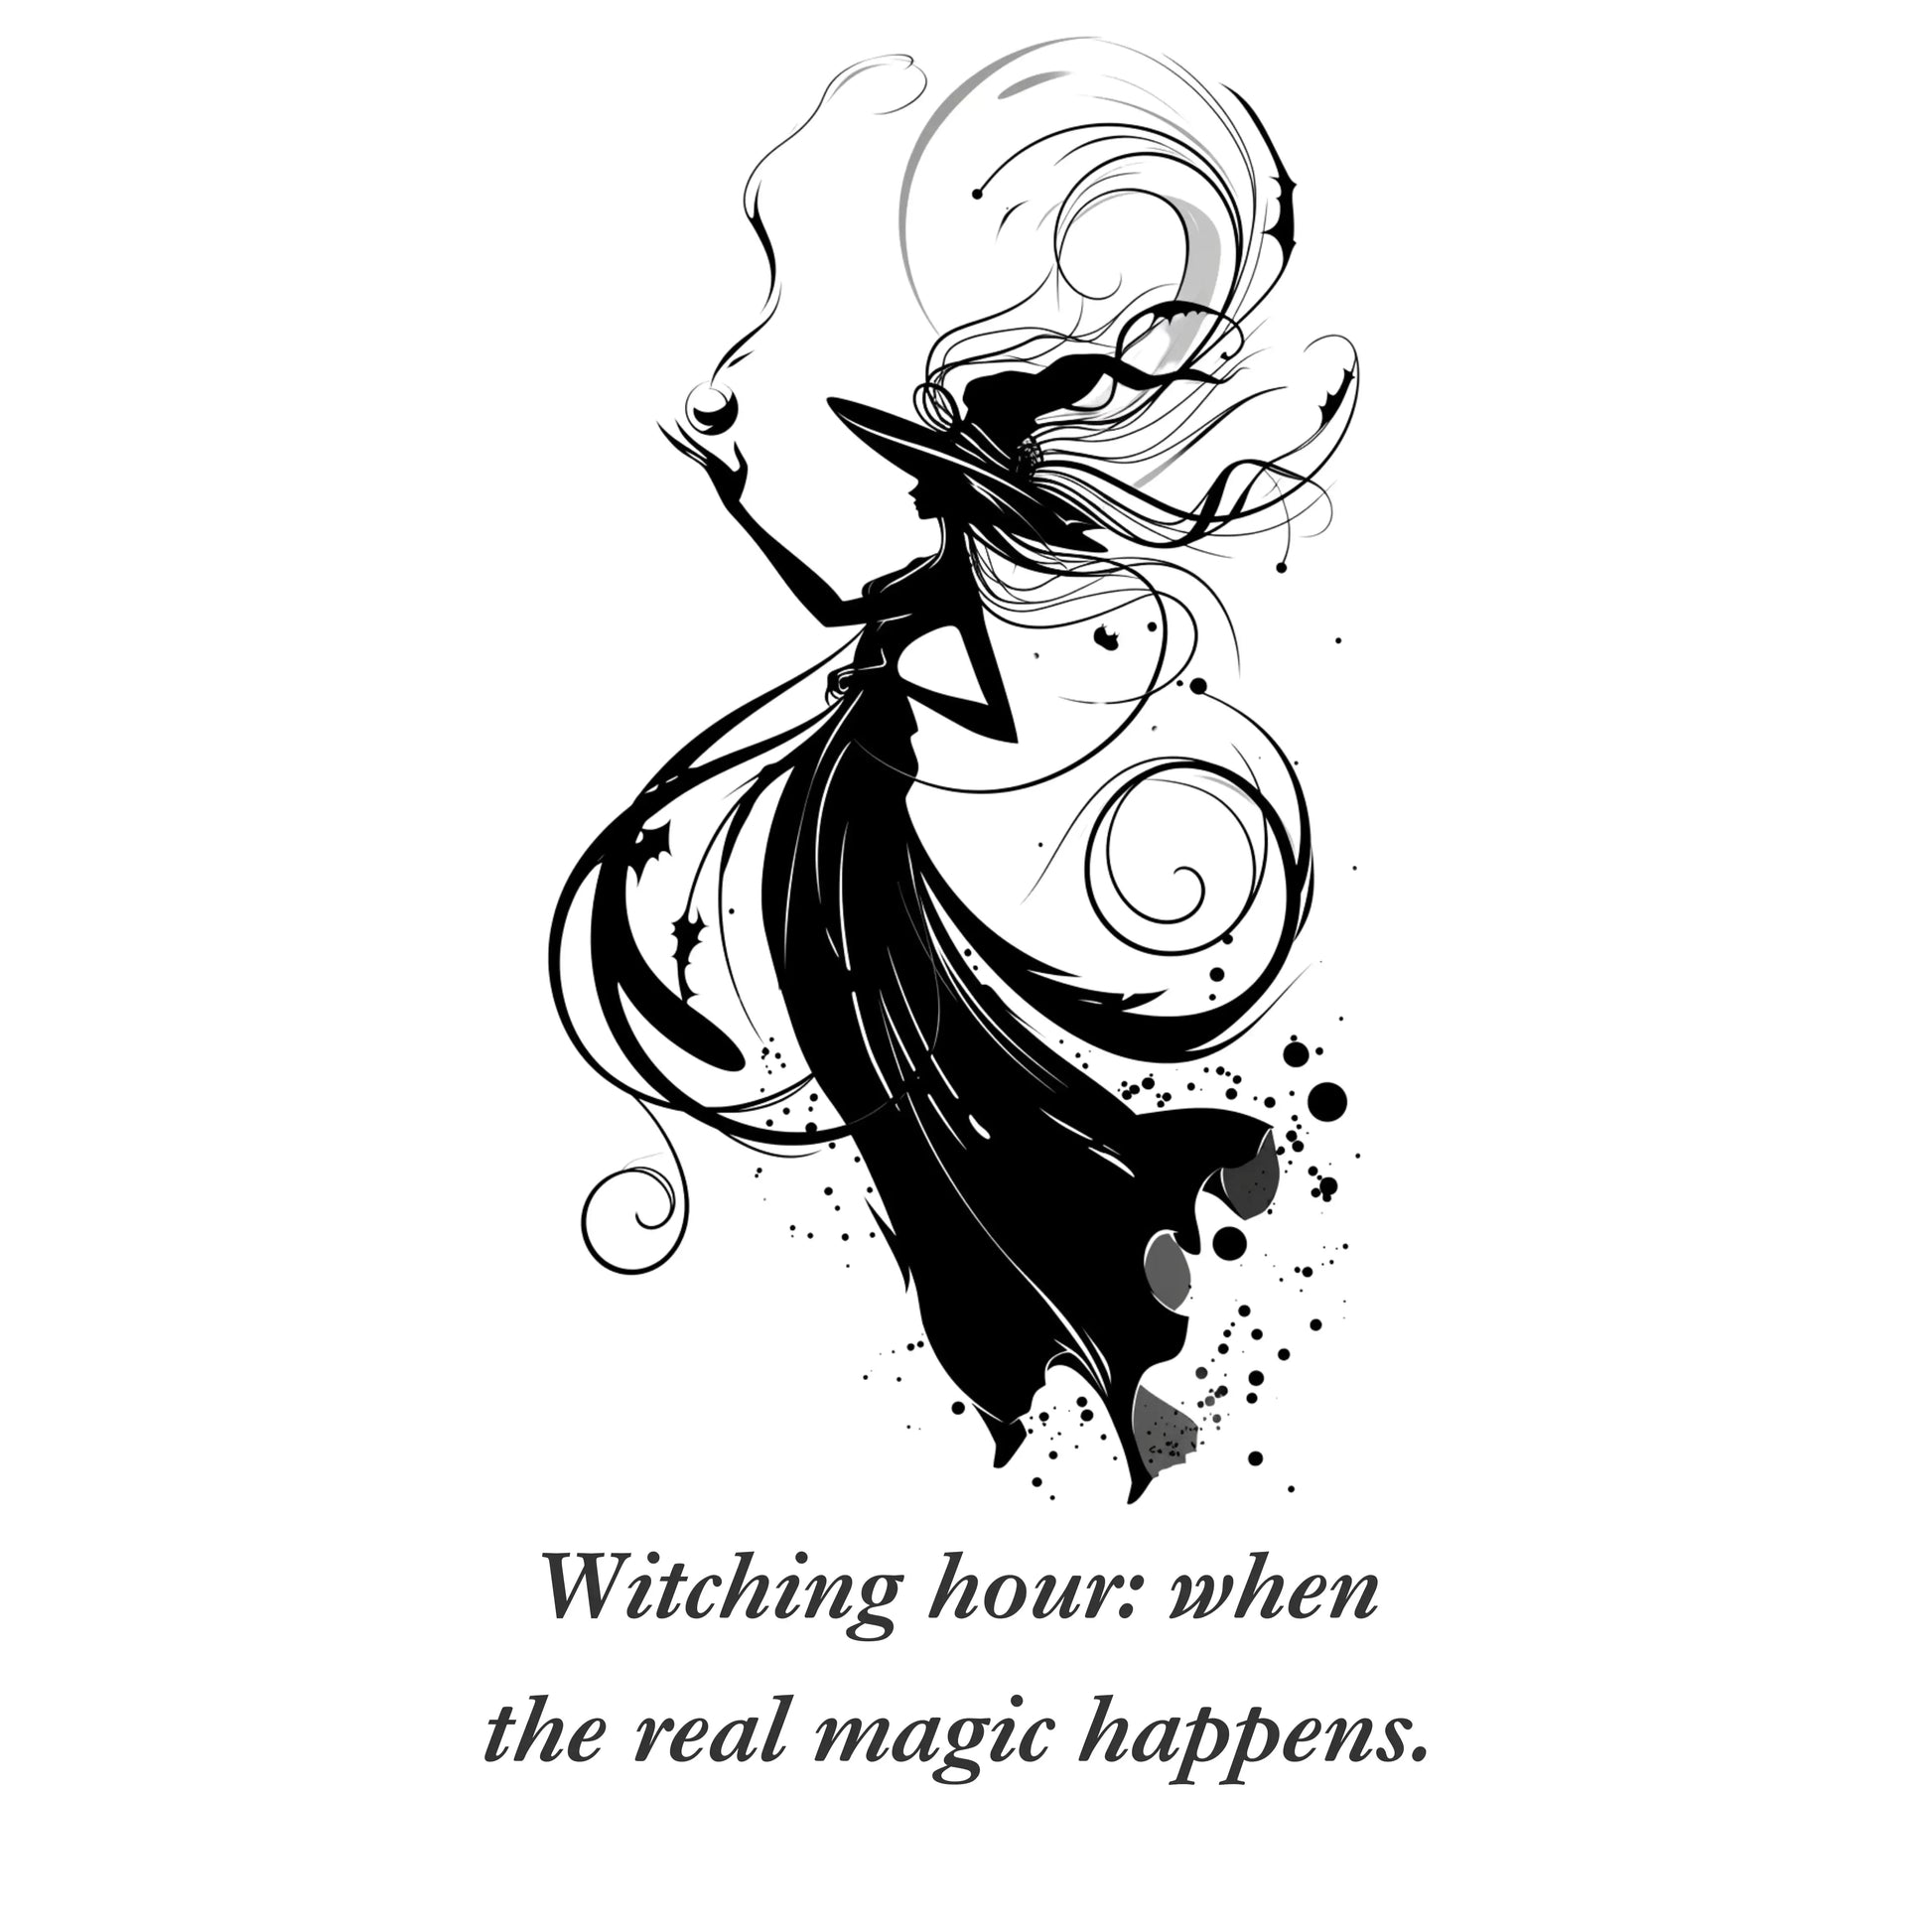 Whiching hour, when the real magic happens. Graphic design from Blk Moon shop.